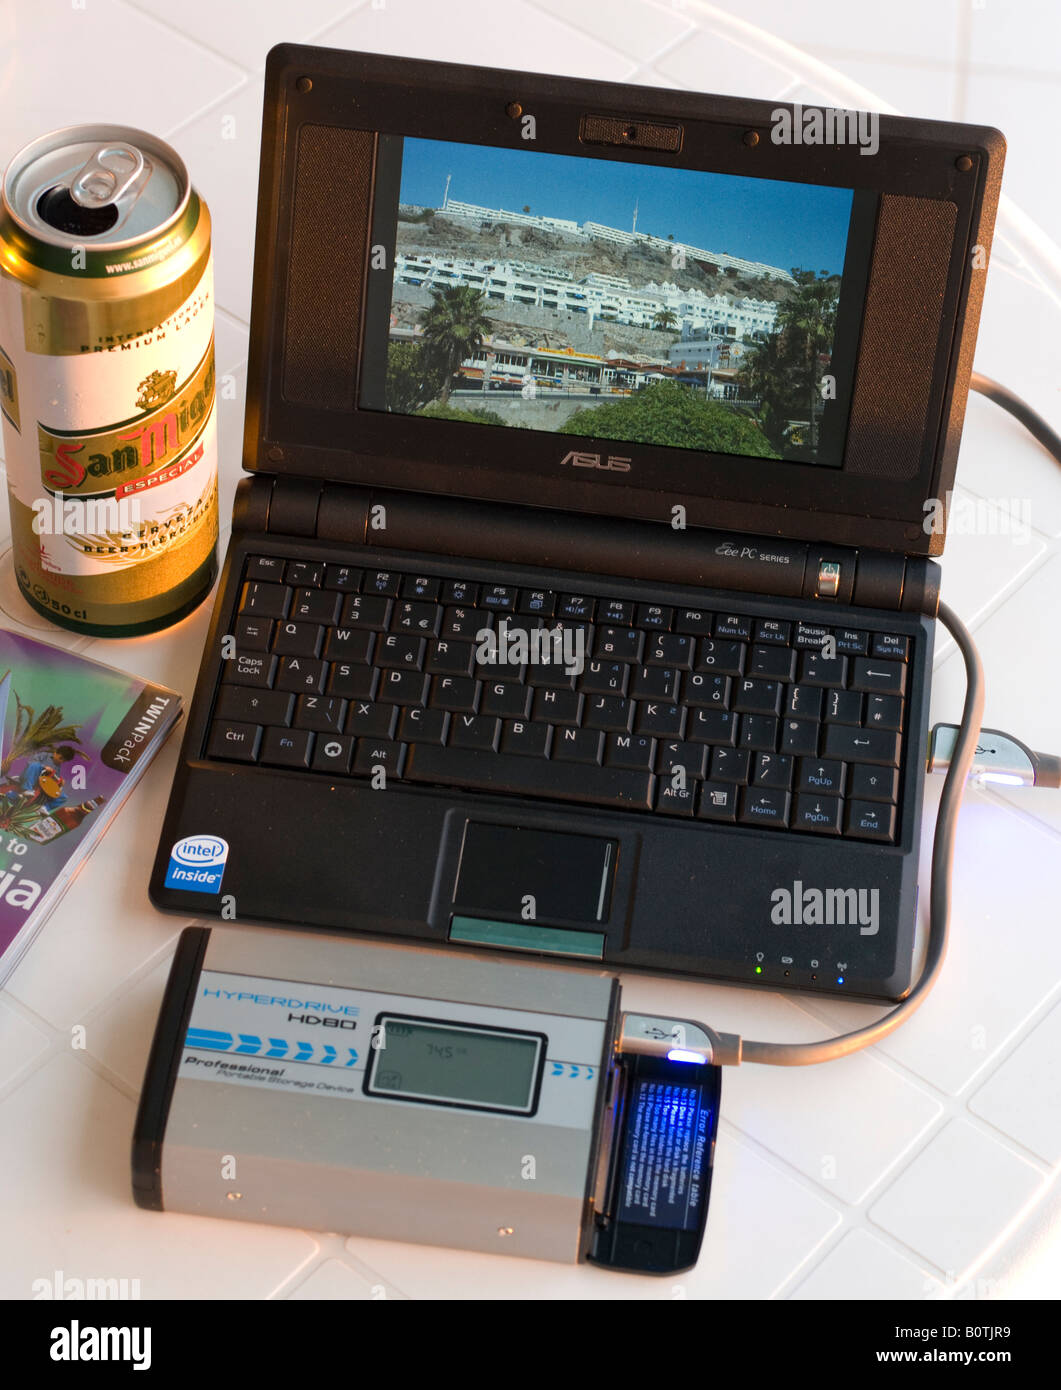 Gran Canaria - using an Eee PC solis state sub laptop connected to a Hyperdrive image storage hard disk to view pictures Stock Photo